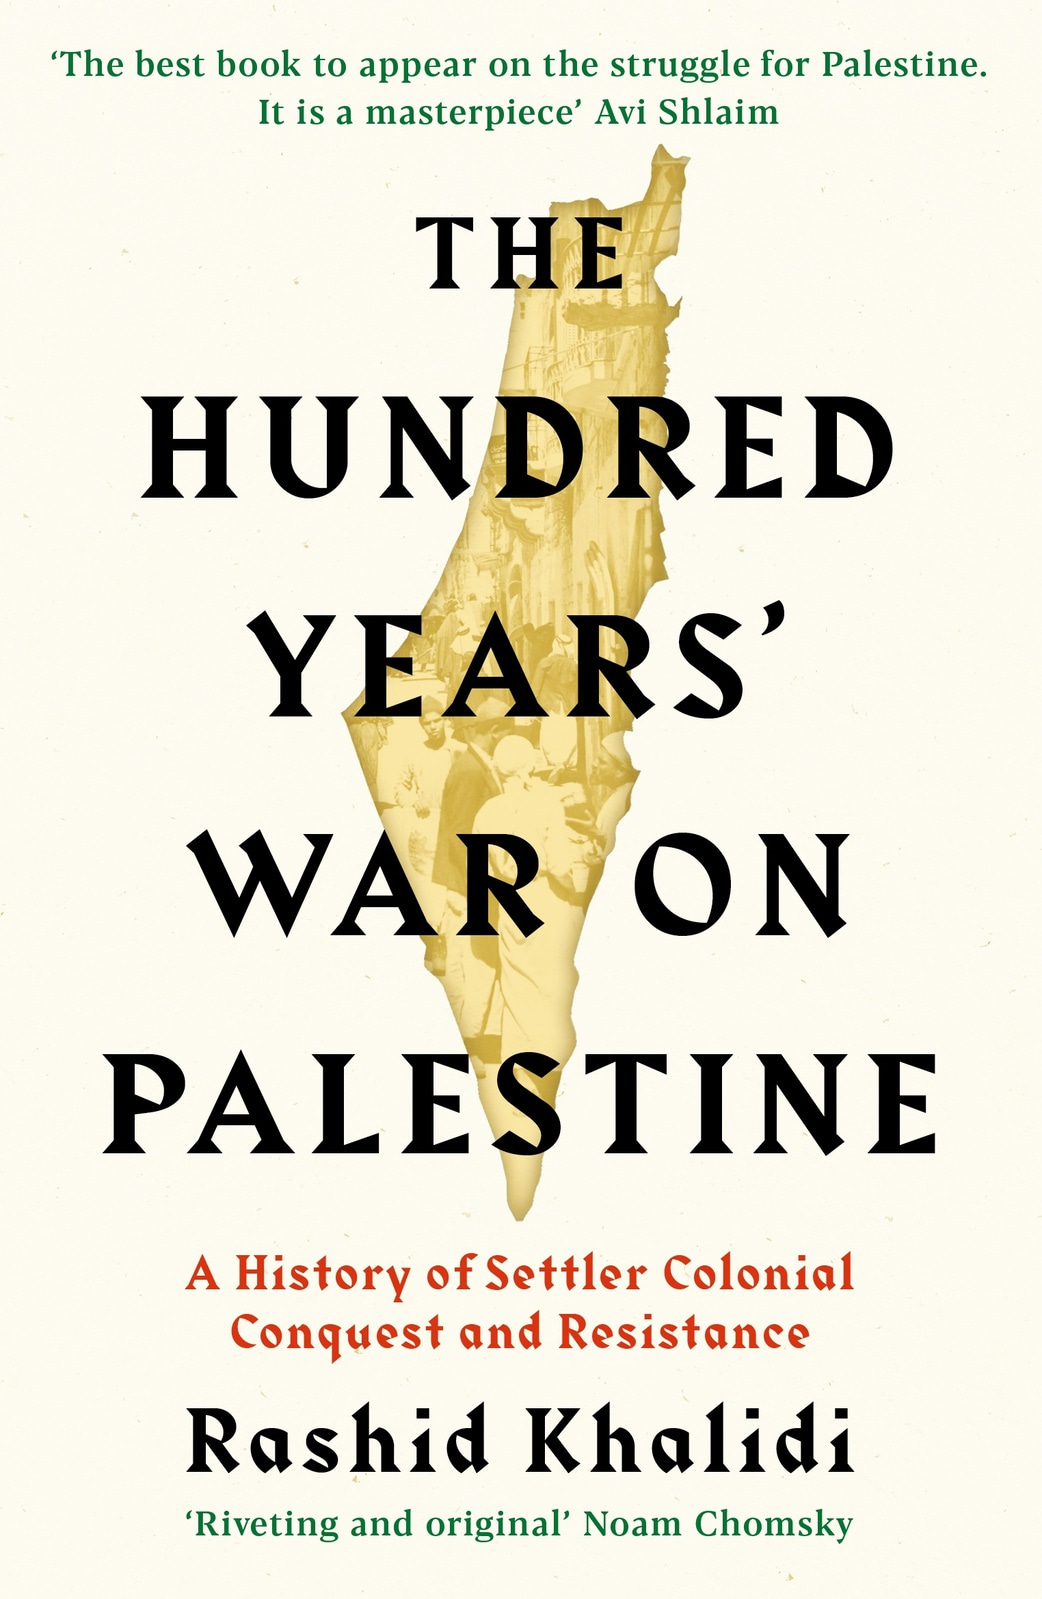 Book cover of "The Hundred Years' War on Palestine